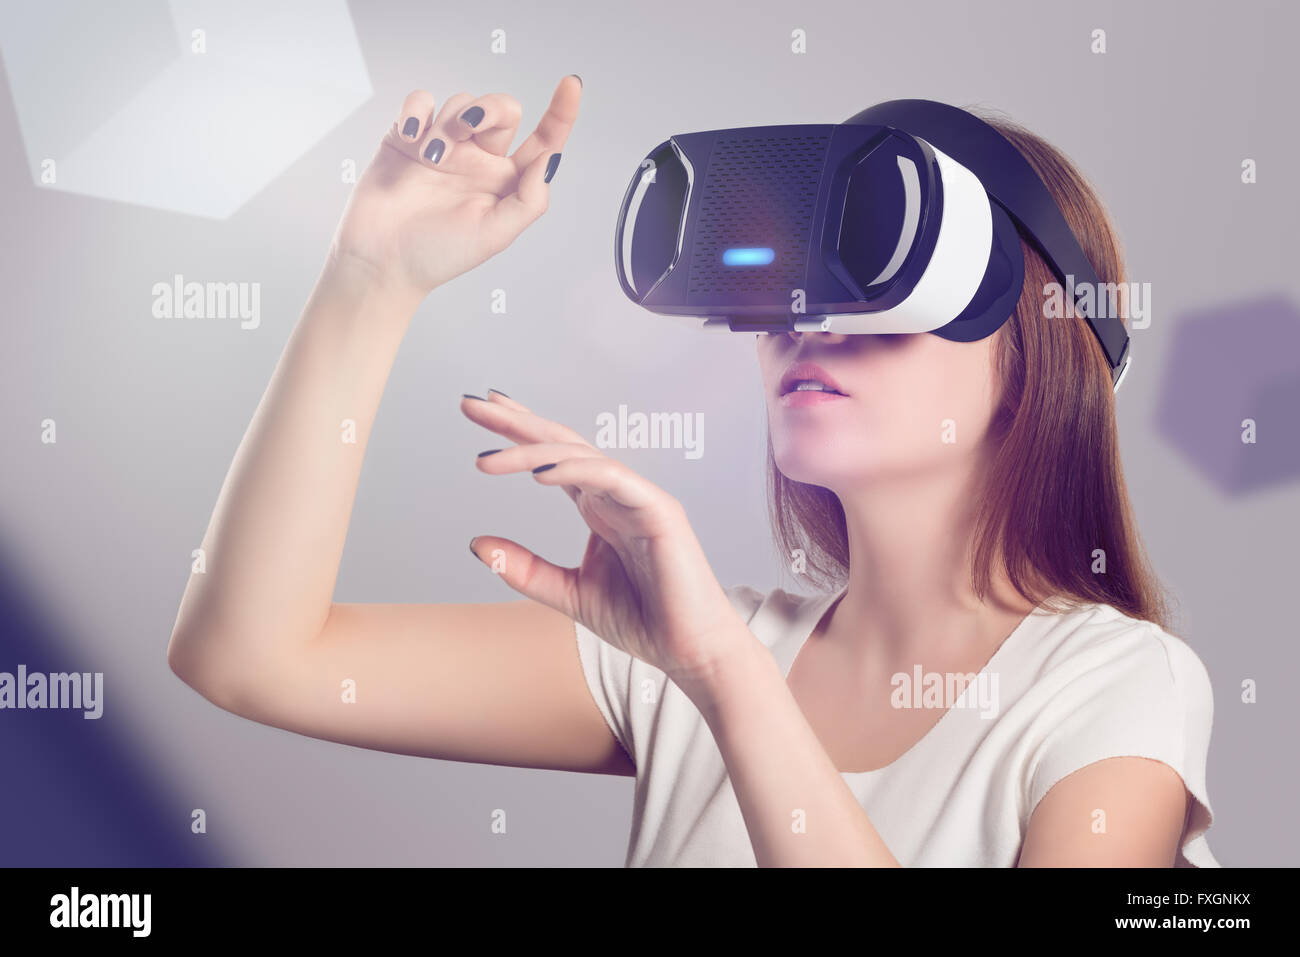 Woman in VR headset looking up and trying to touch objects in virtual reality. VR is a computer technology. Stock Photo